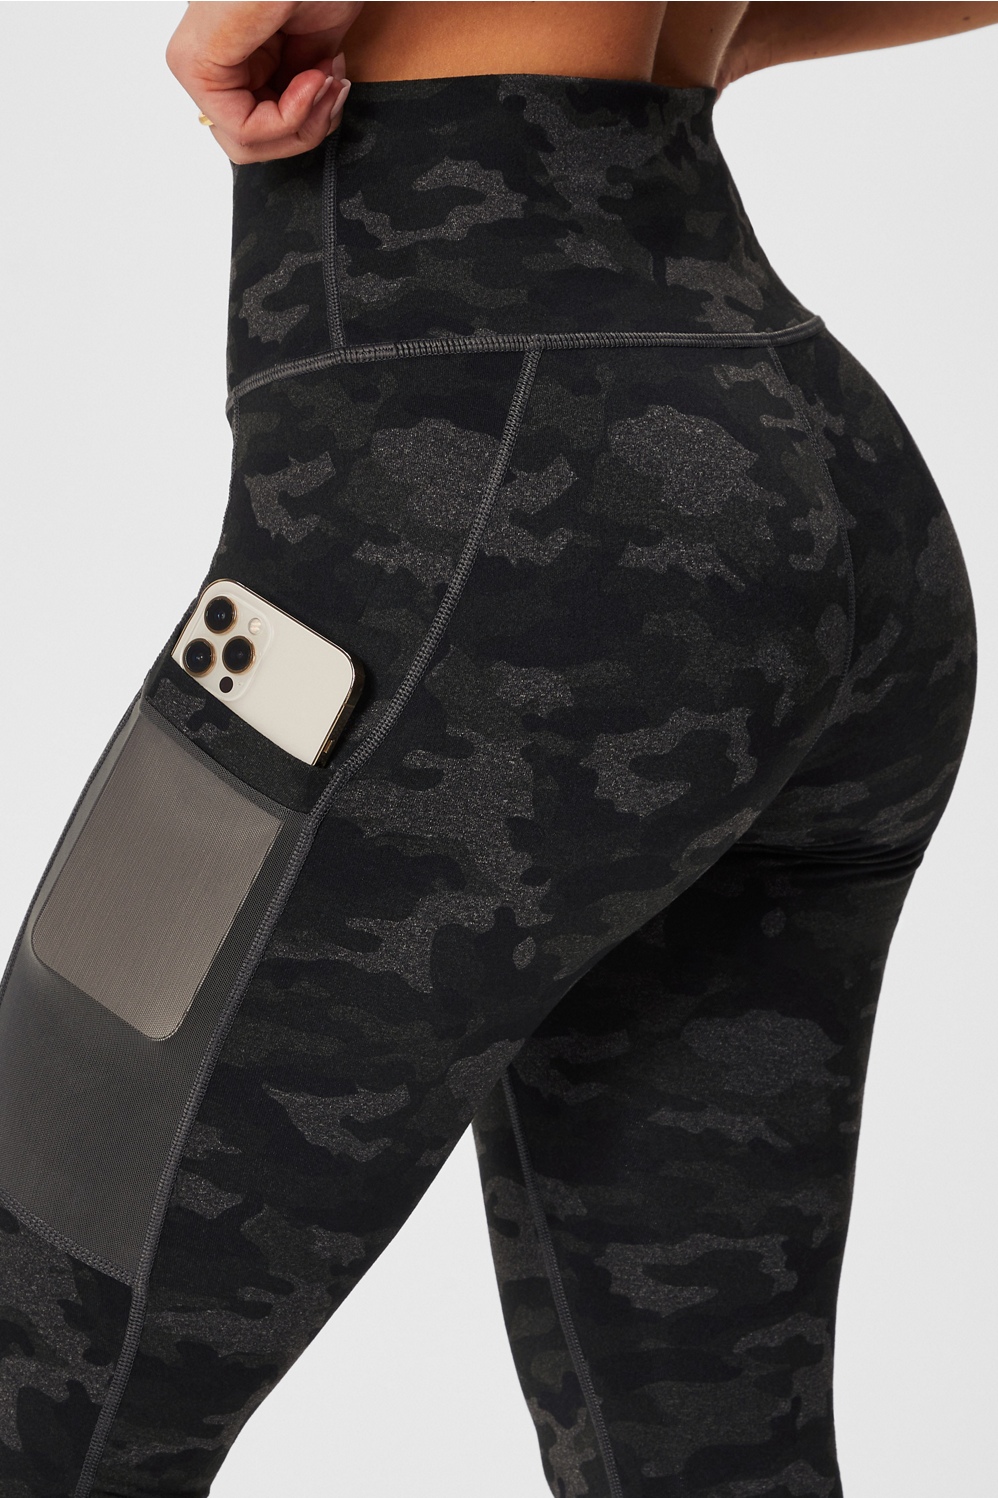 Leggings With Phone Pocket Target Black  International Society of  Precision Agriculture